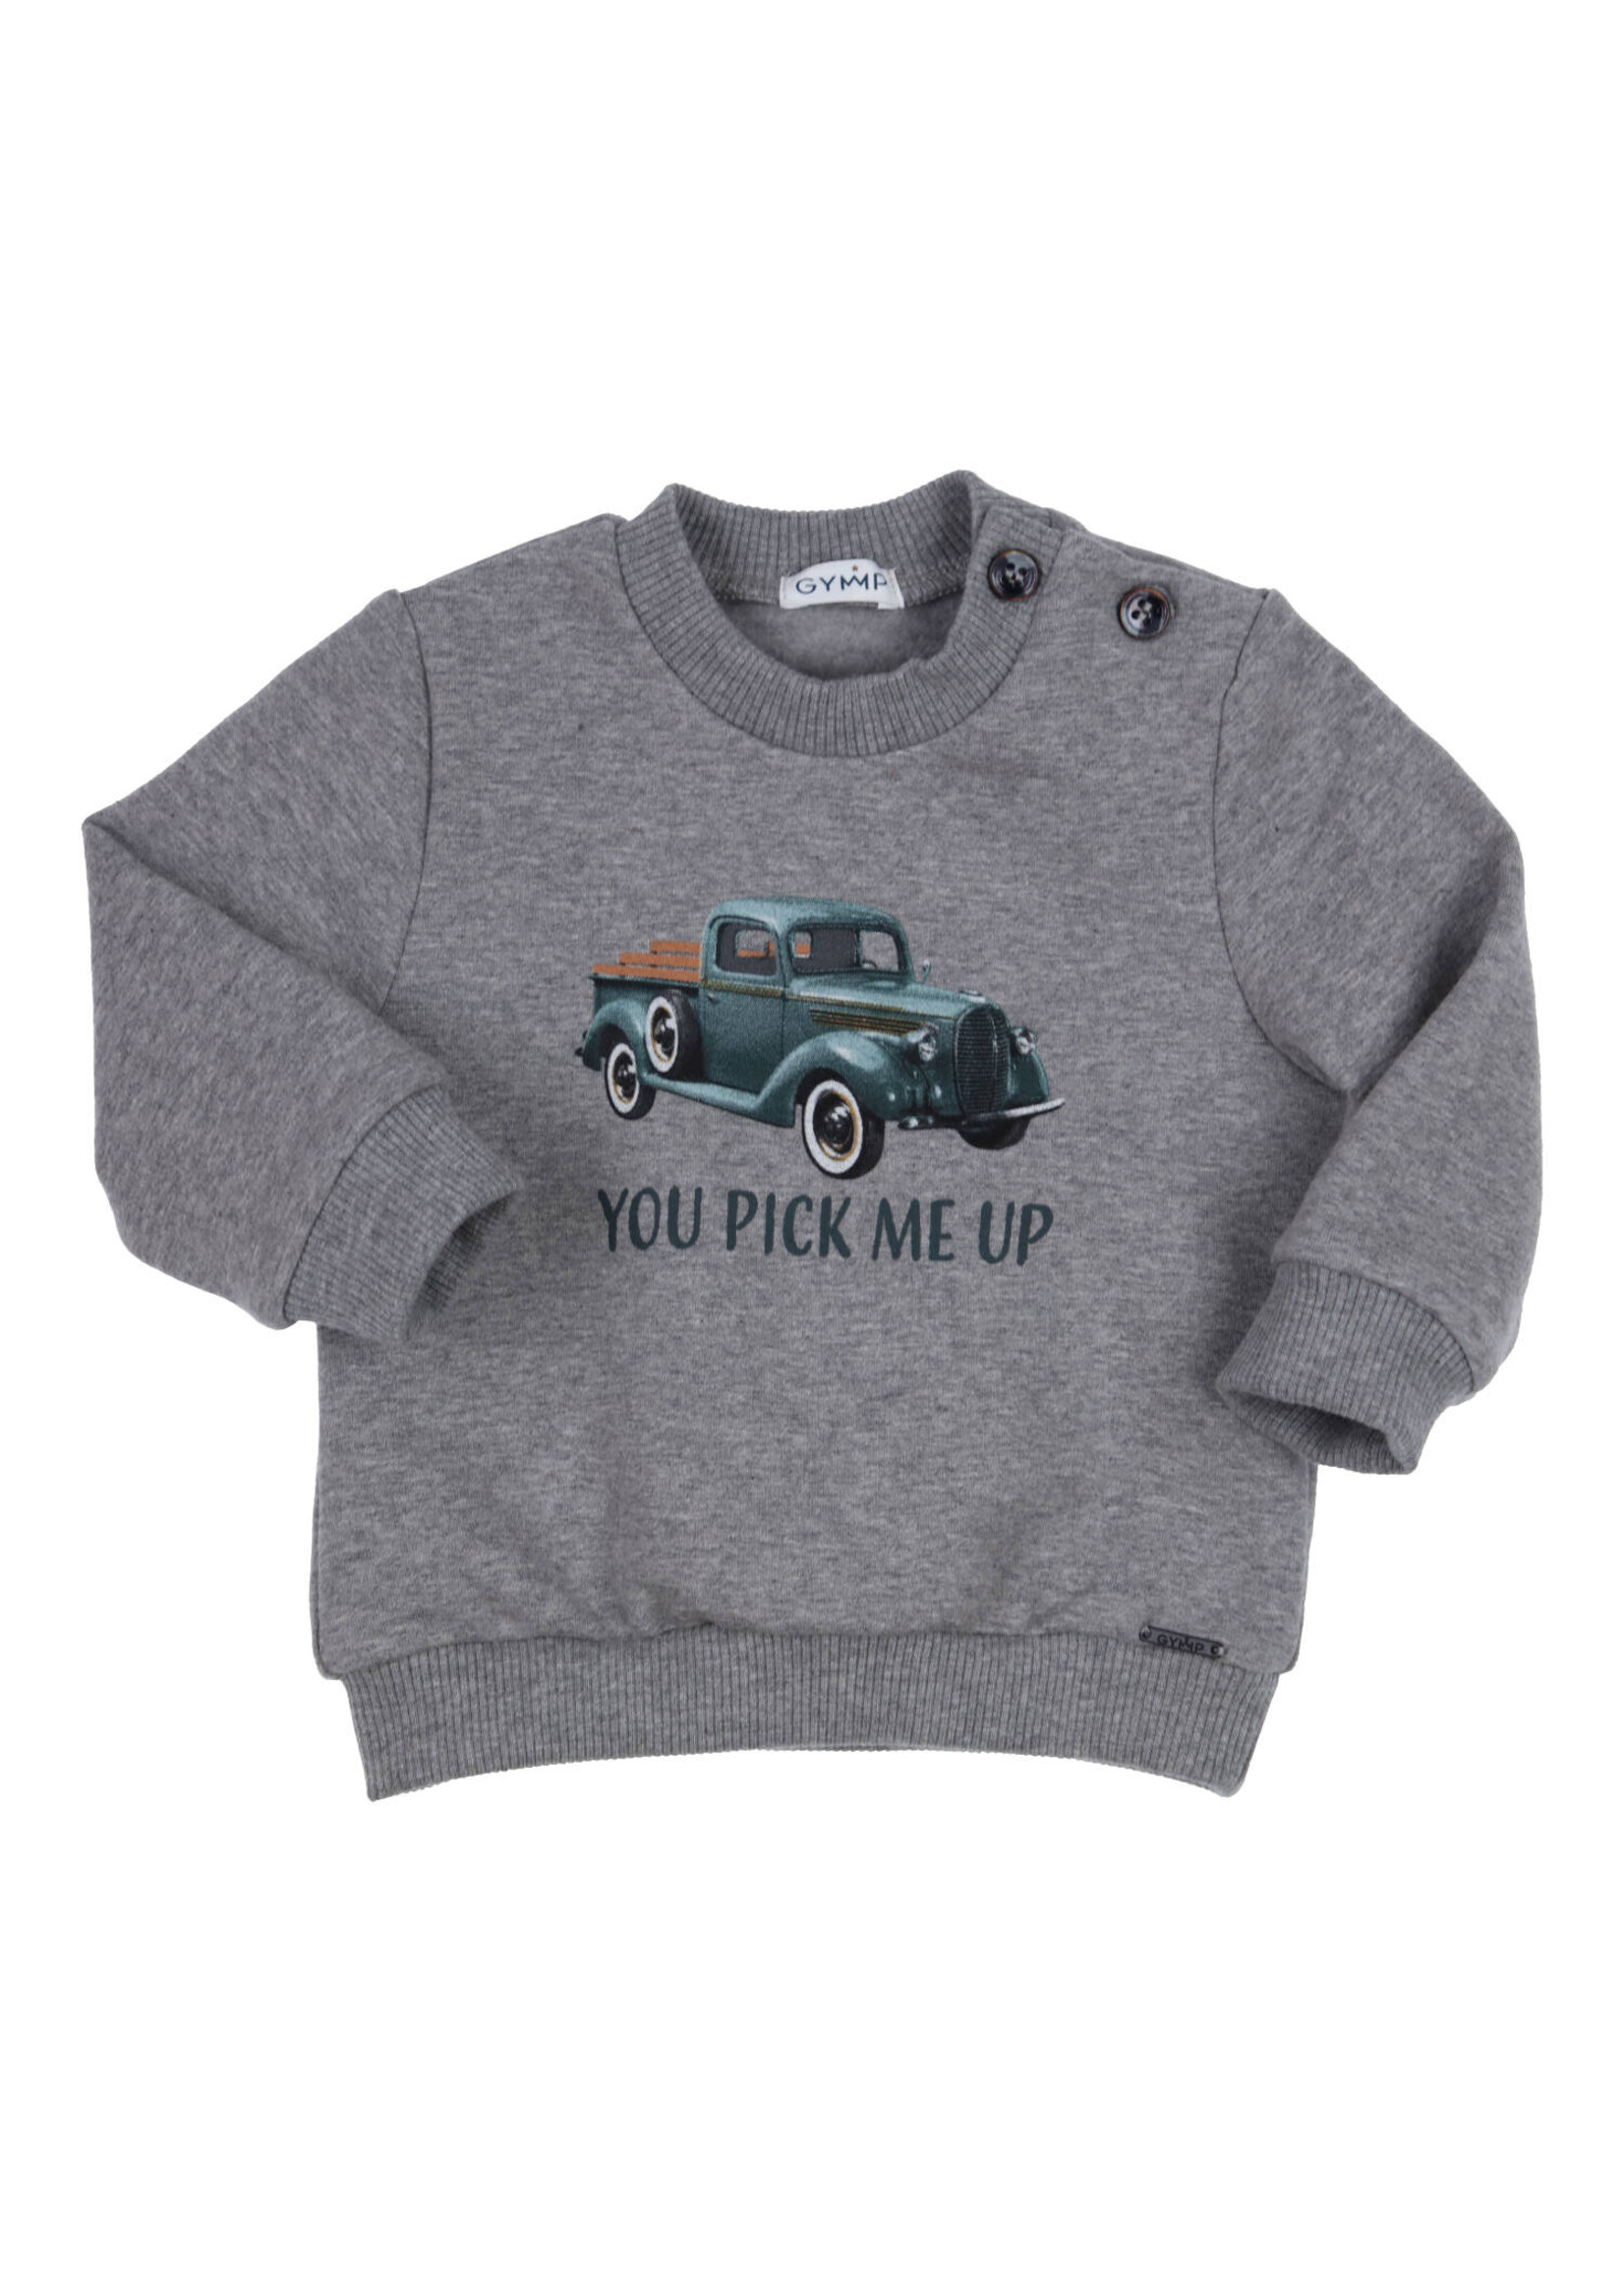 Gymp sweater truck